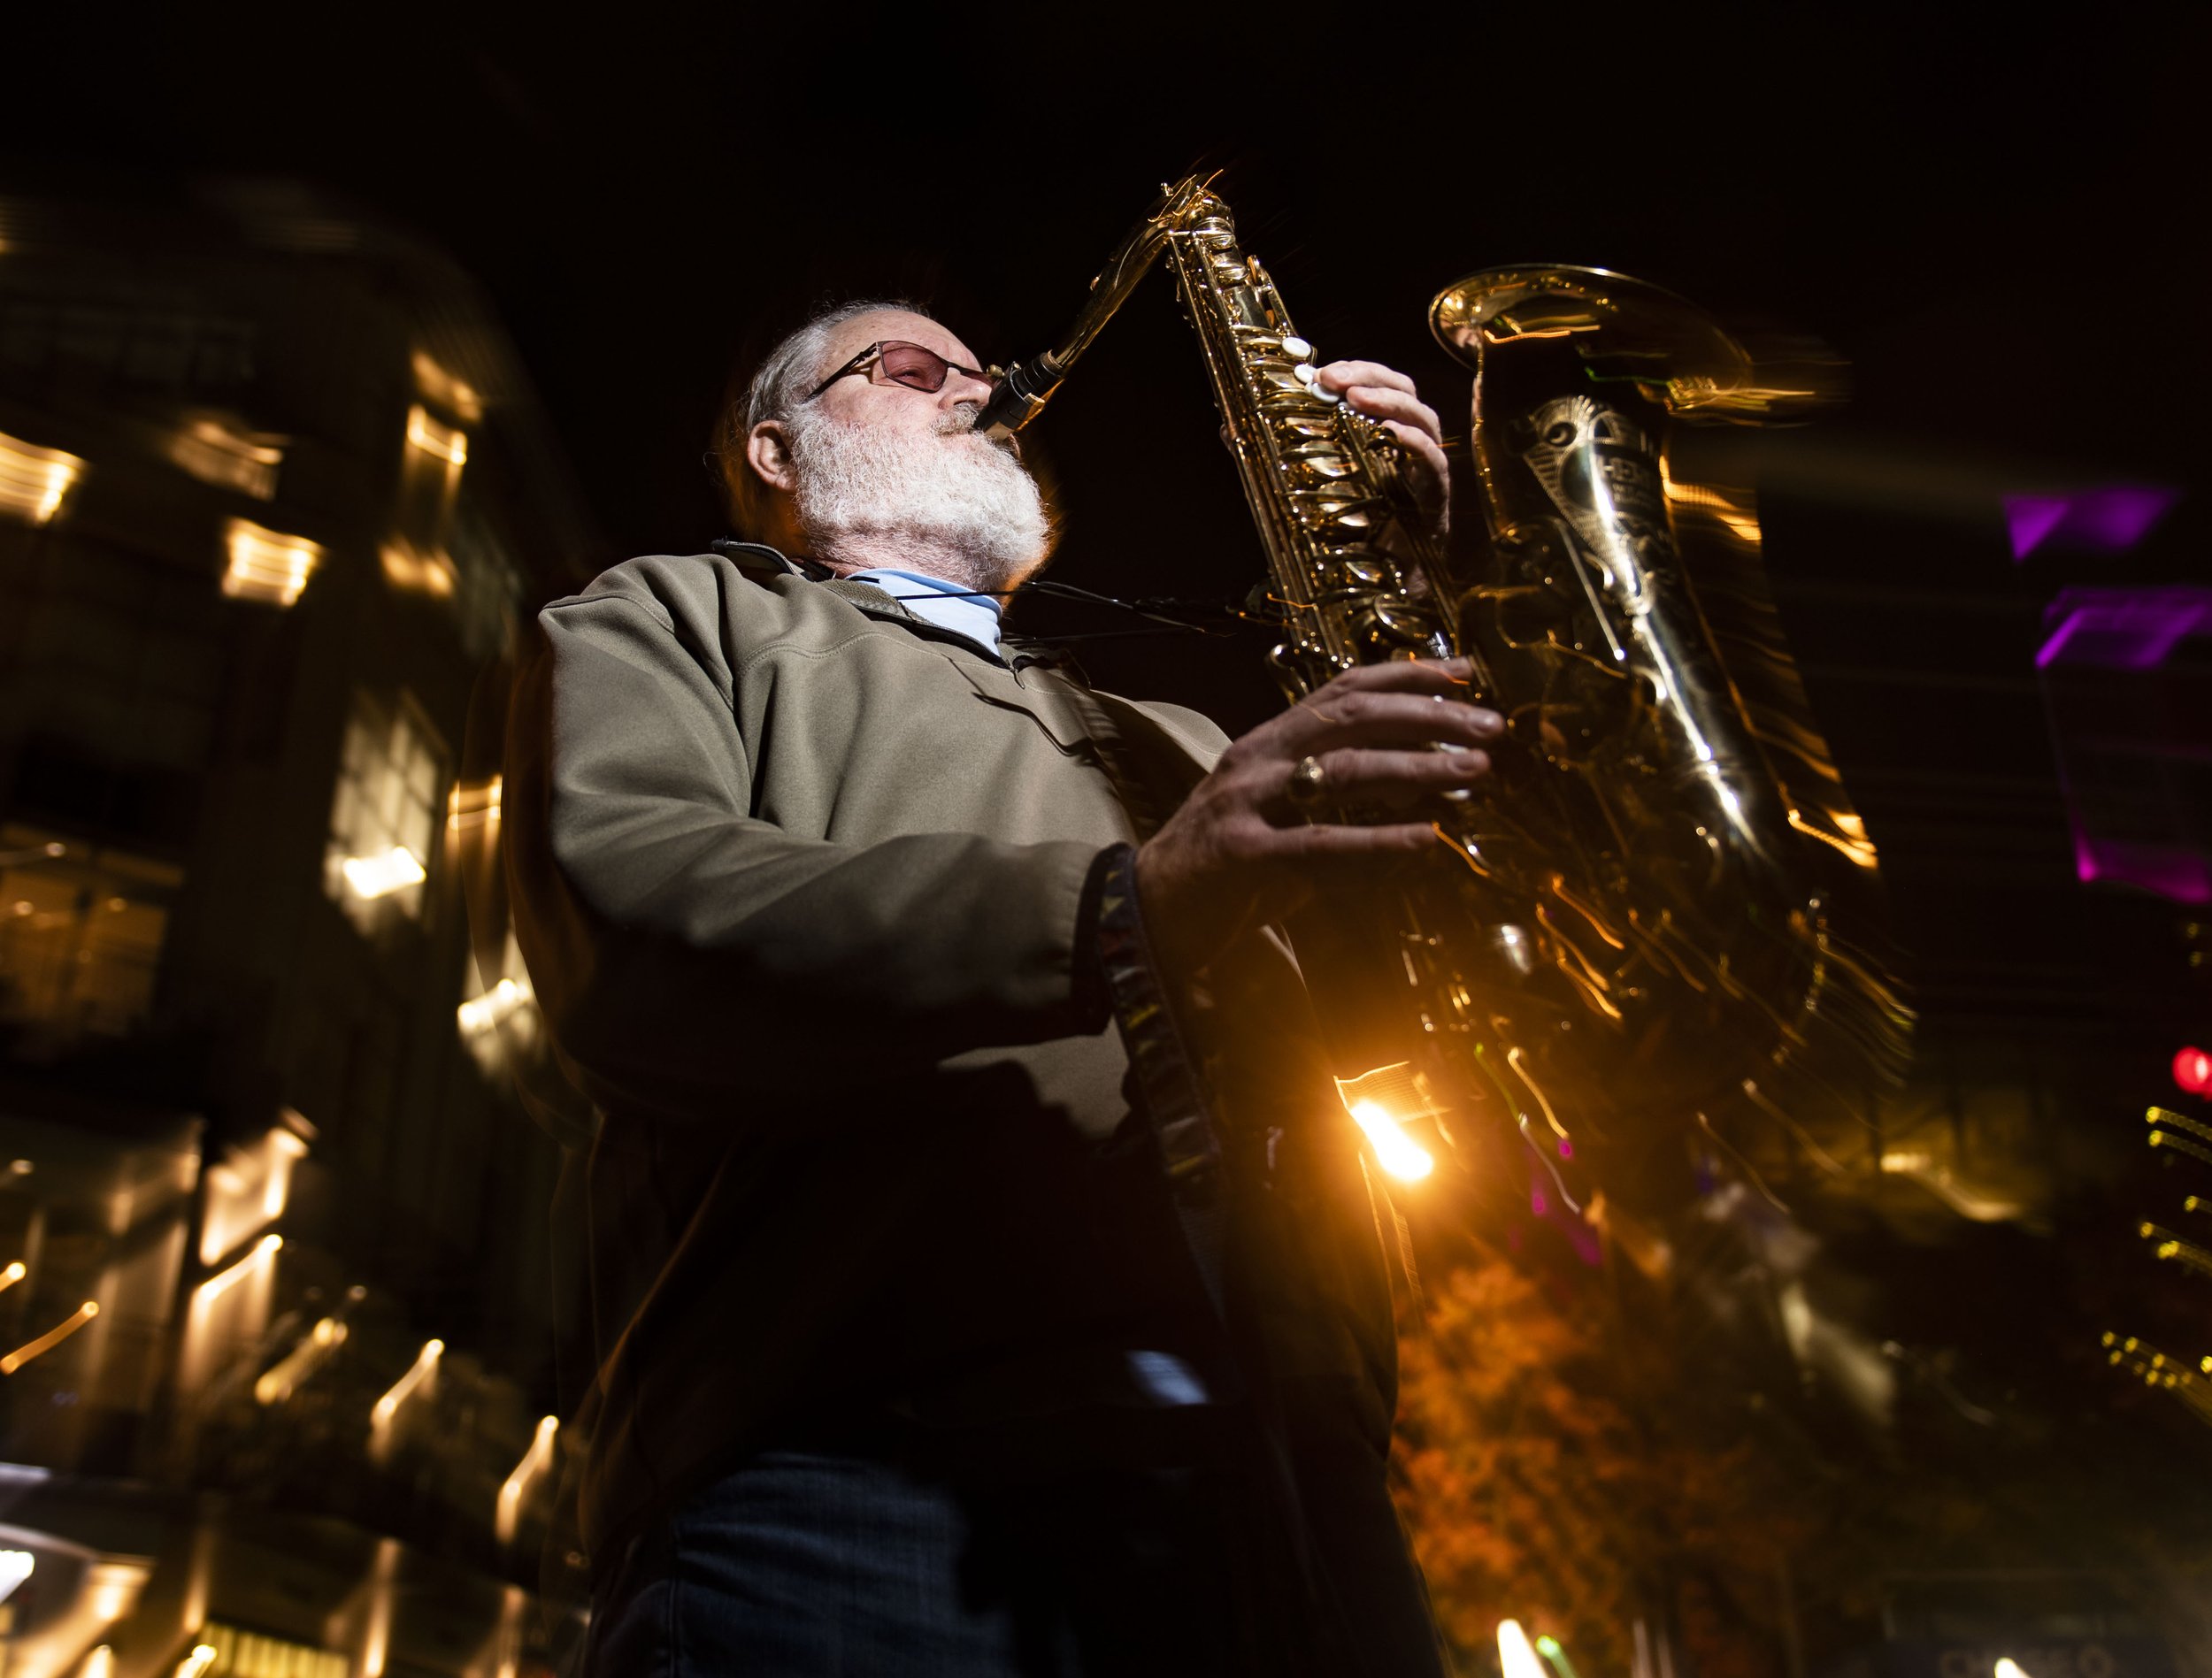  John Sterling of Greenville, plays his saxophone around downtown Greenville, Tuesday, November 16, 2021.   